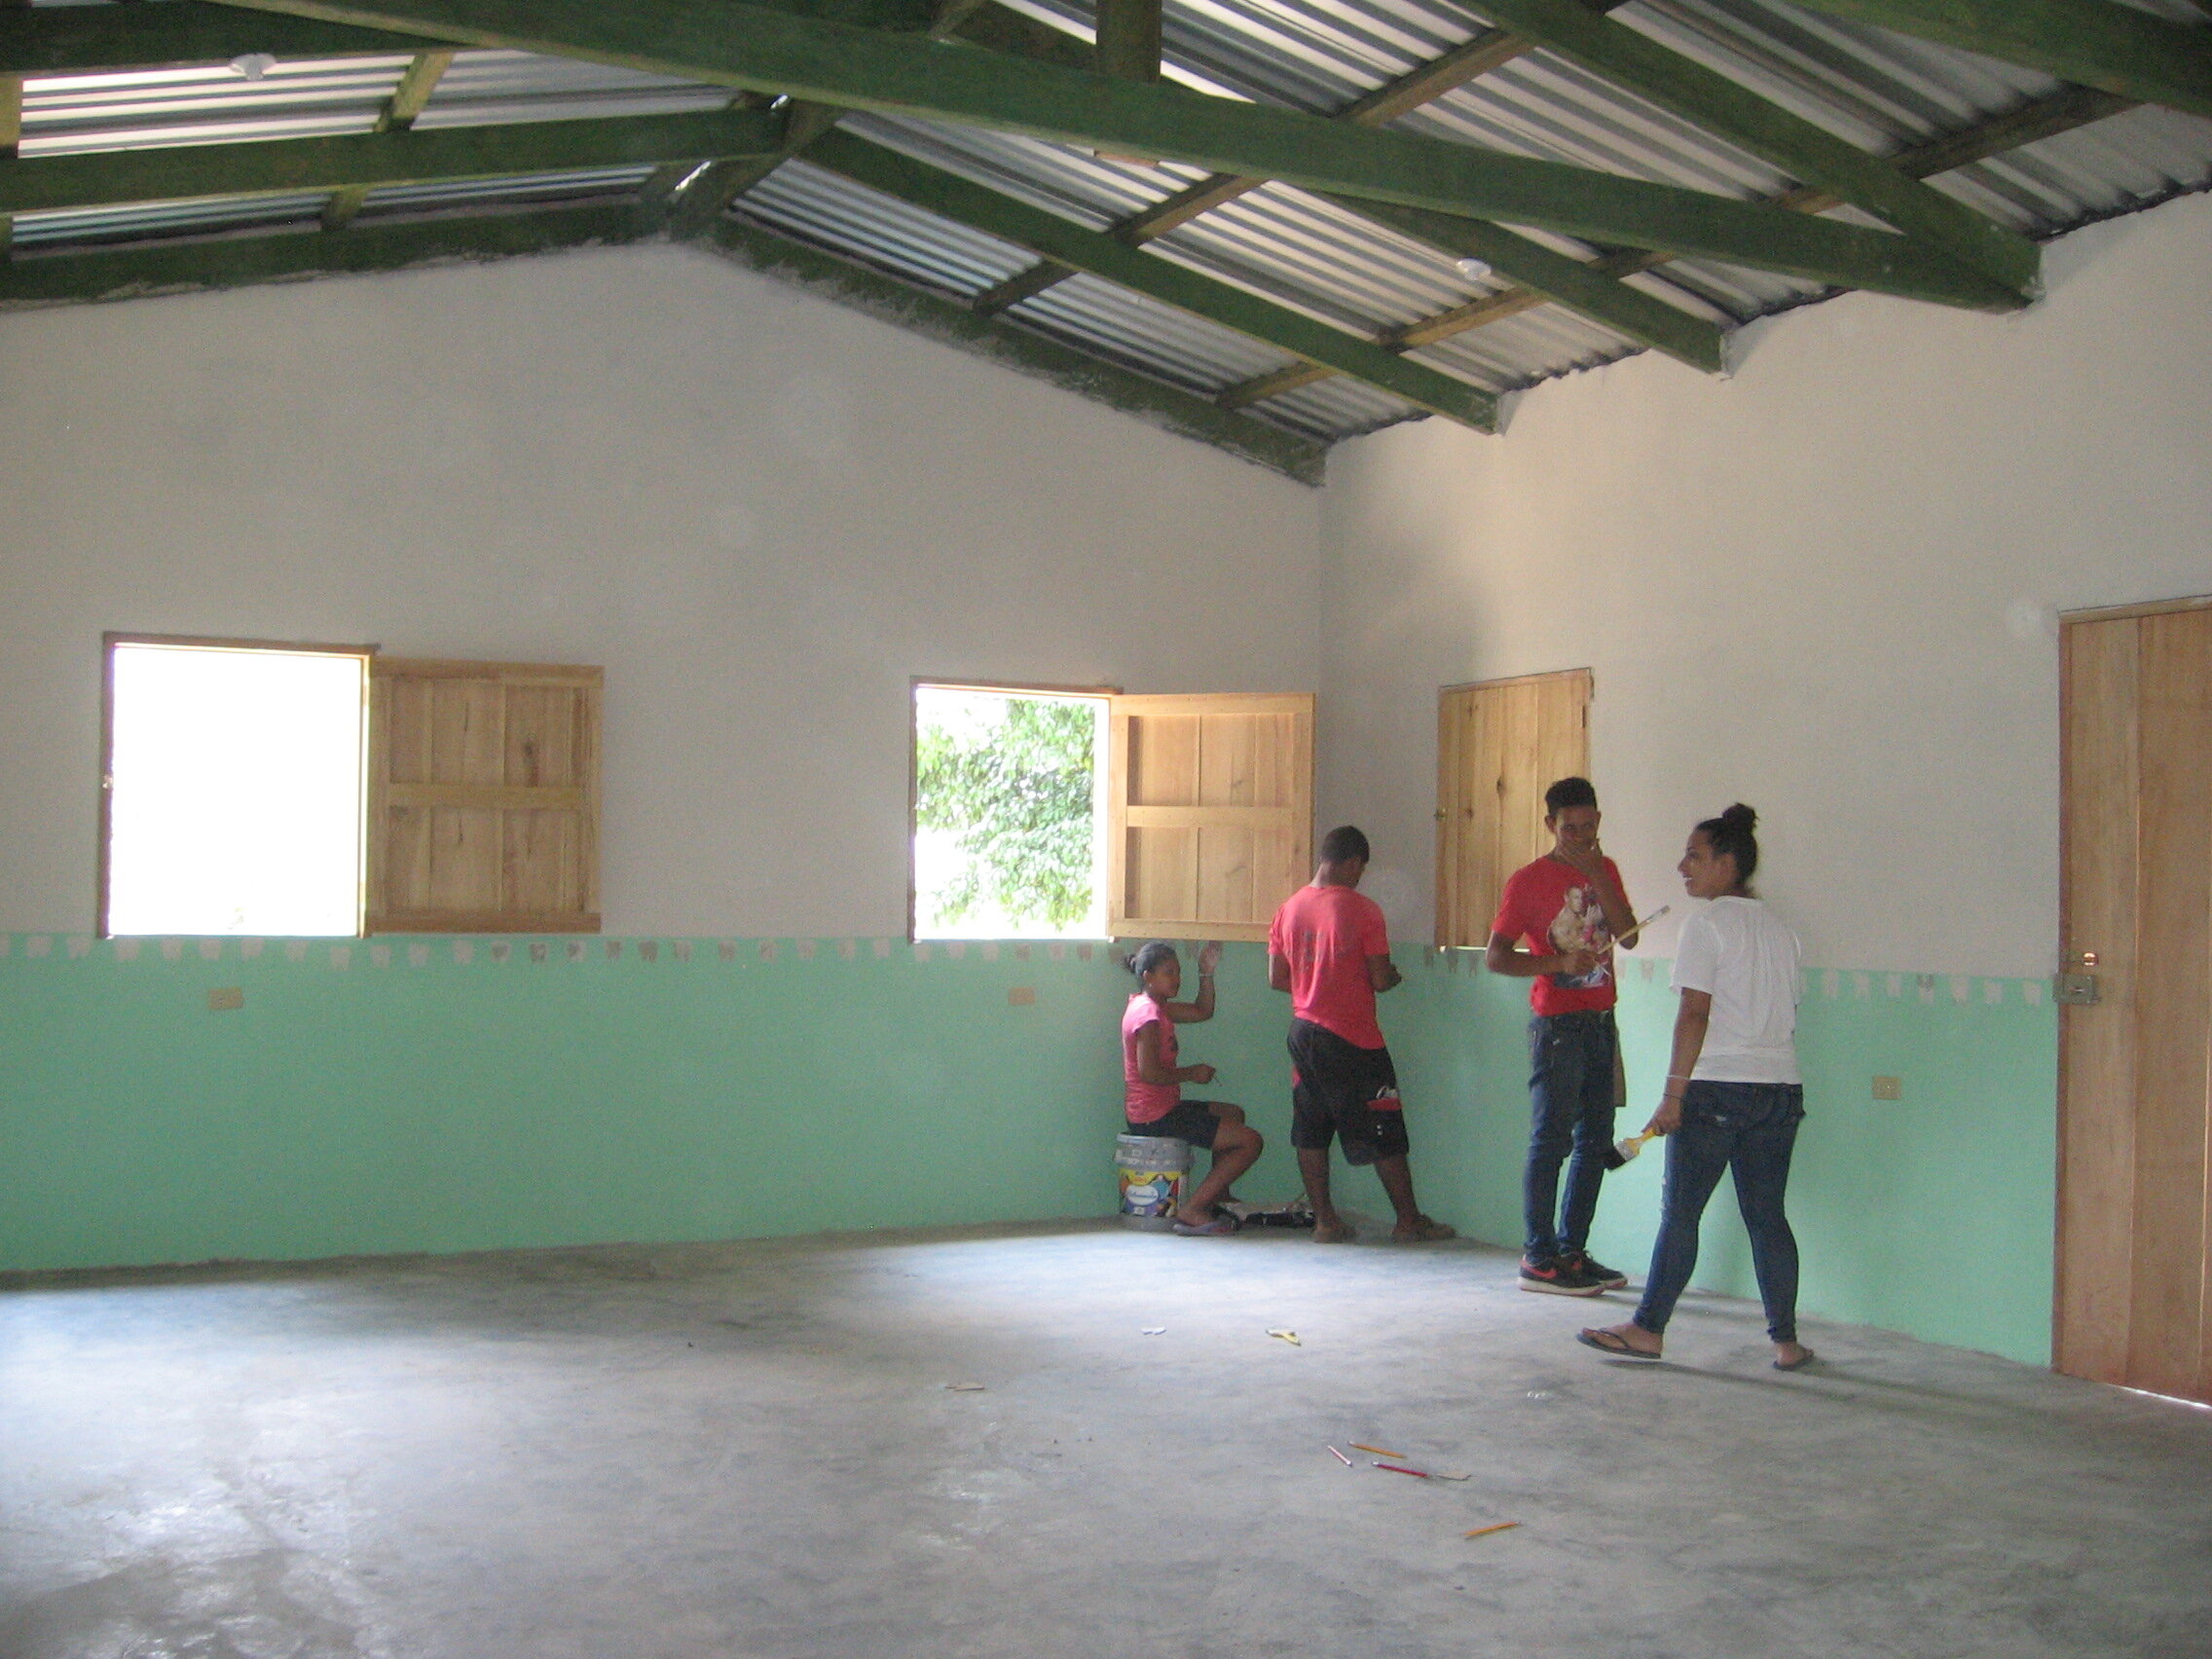 The nearly finished dental clinic interior.